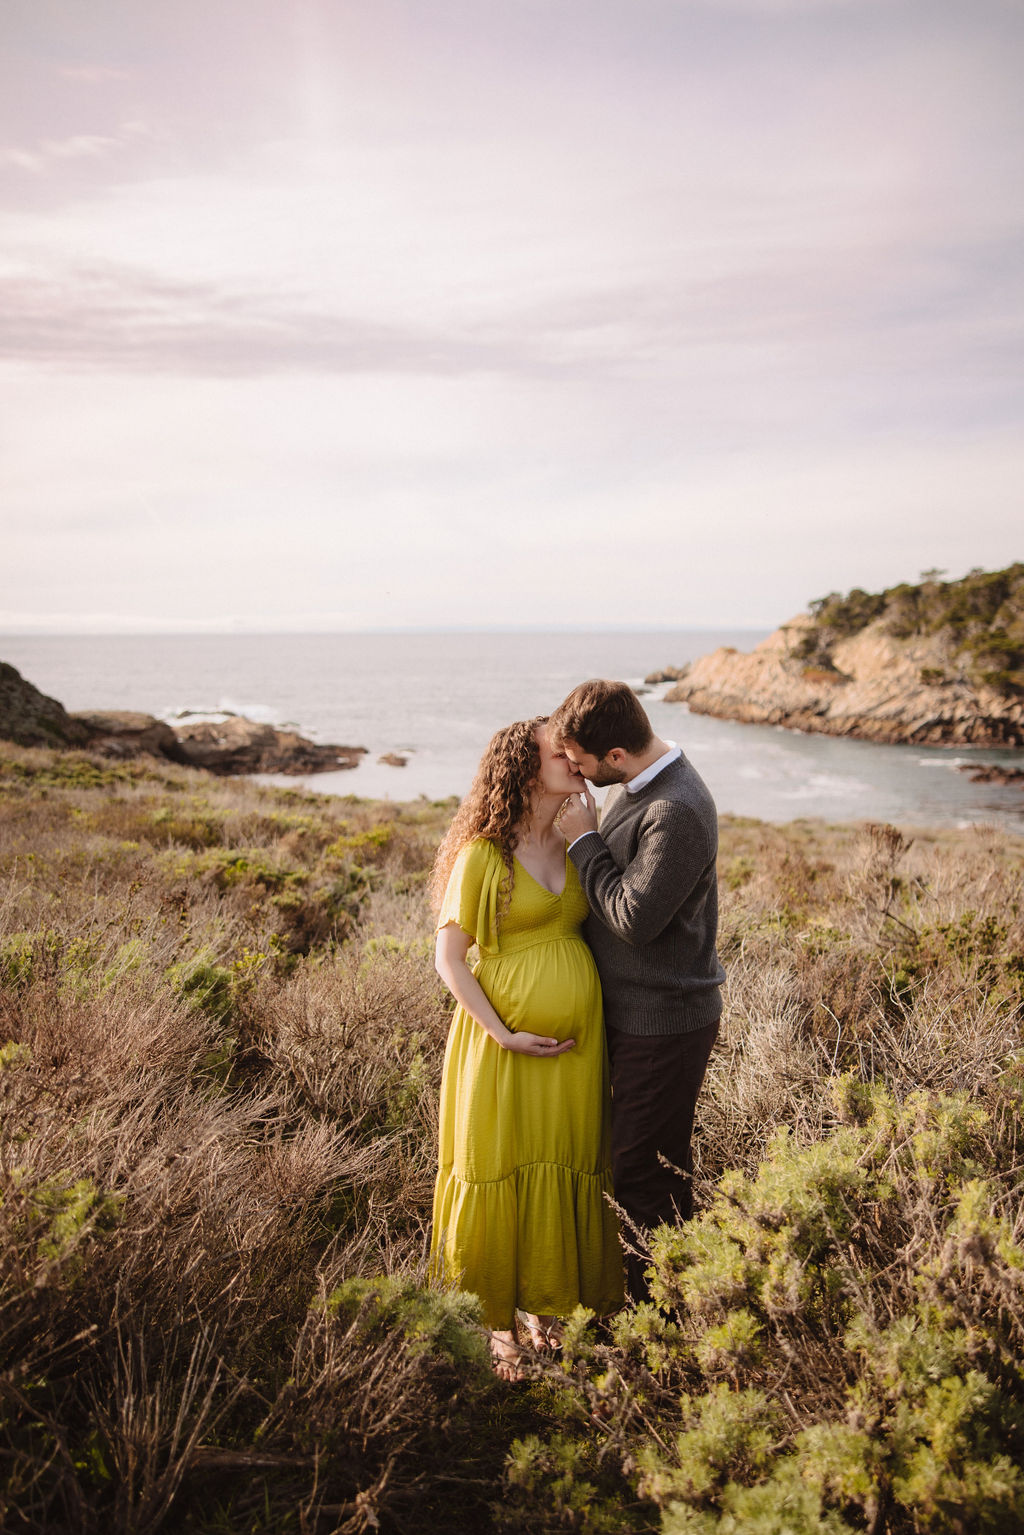 A couple embracing on a coastal landscape with the sea in the background at Big Sur